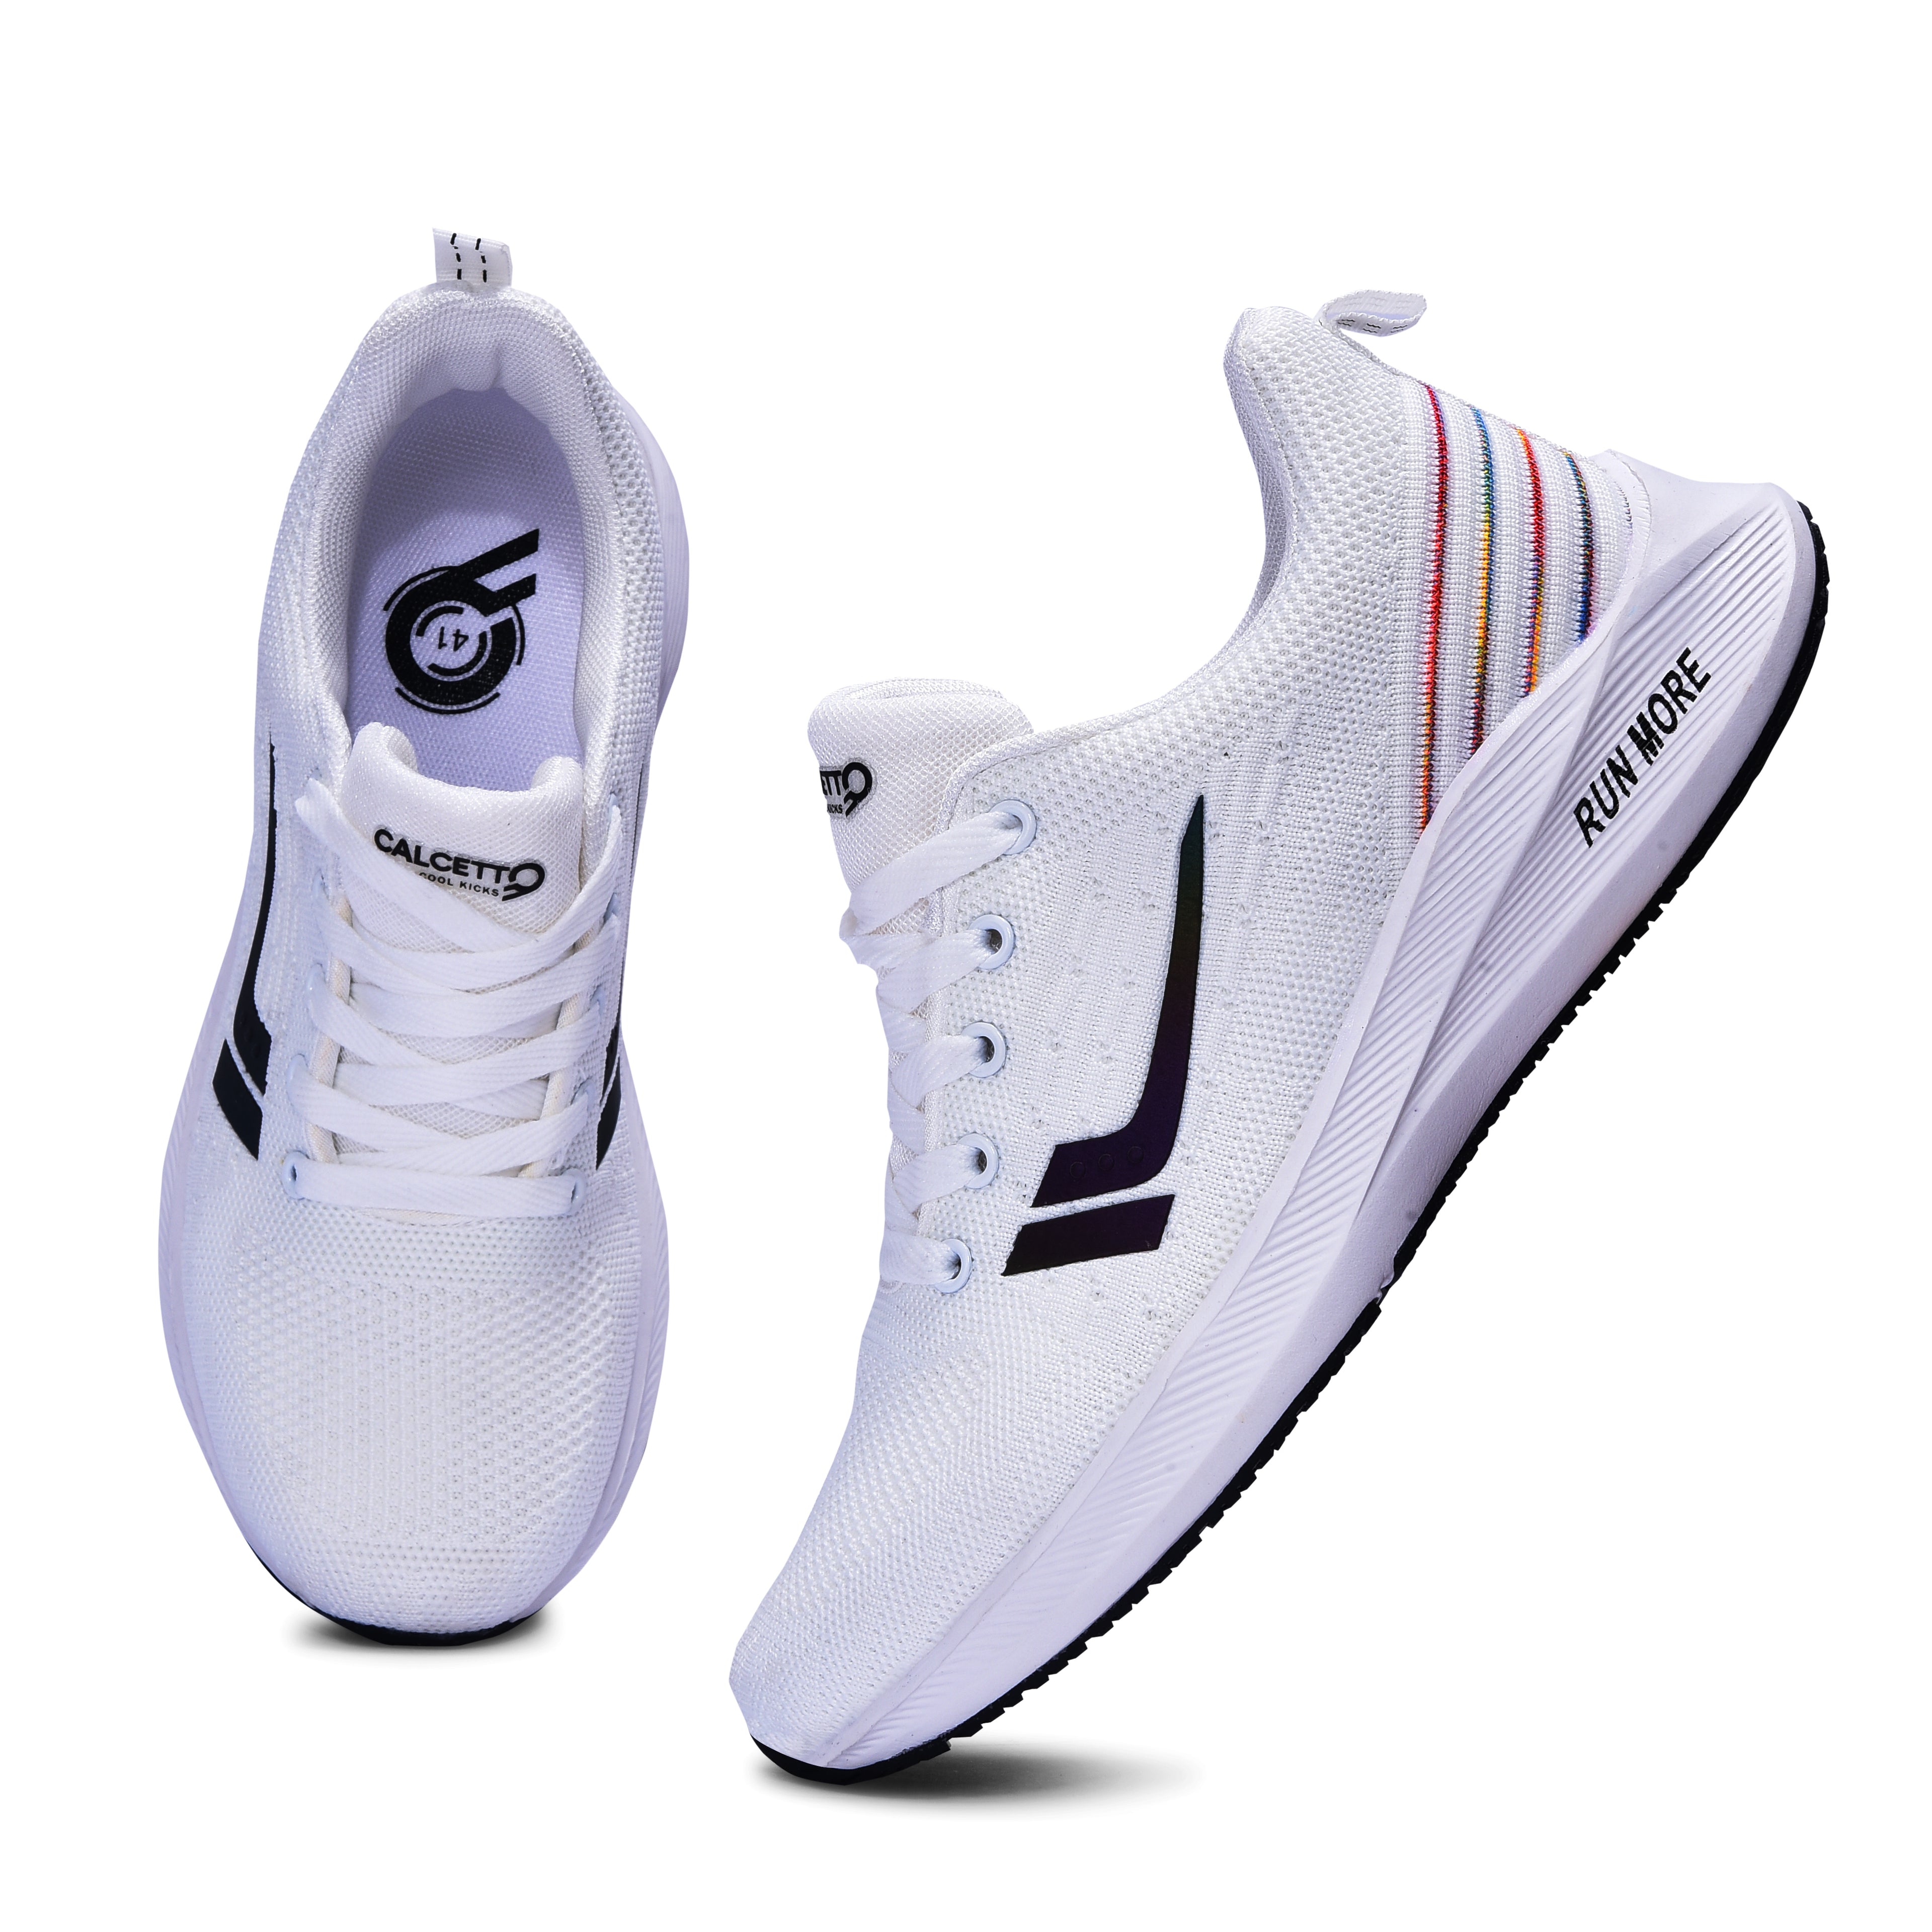 Calcetto CLT-0975 White Running Shoe For Men